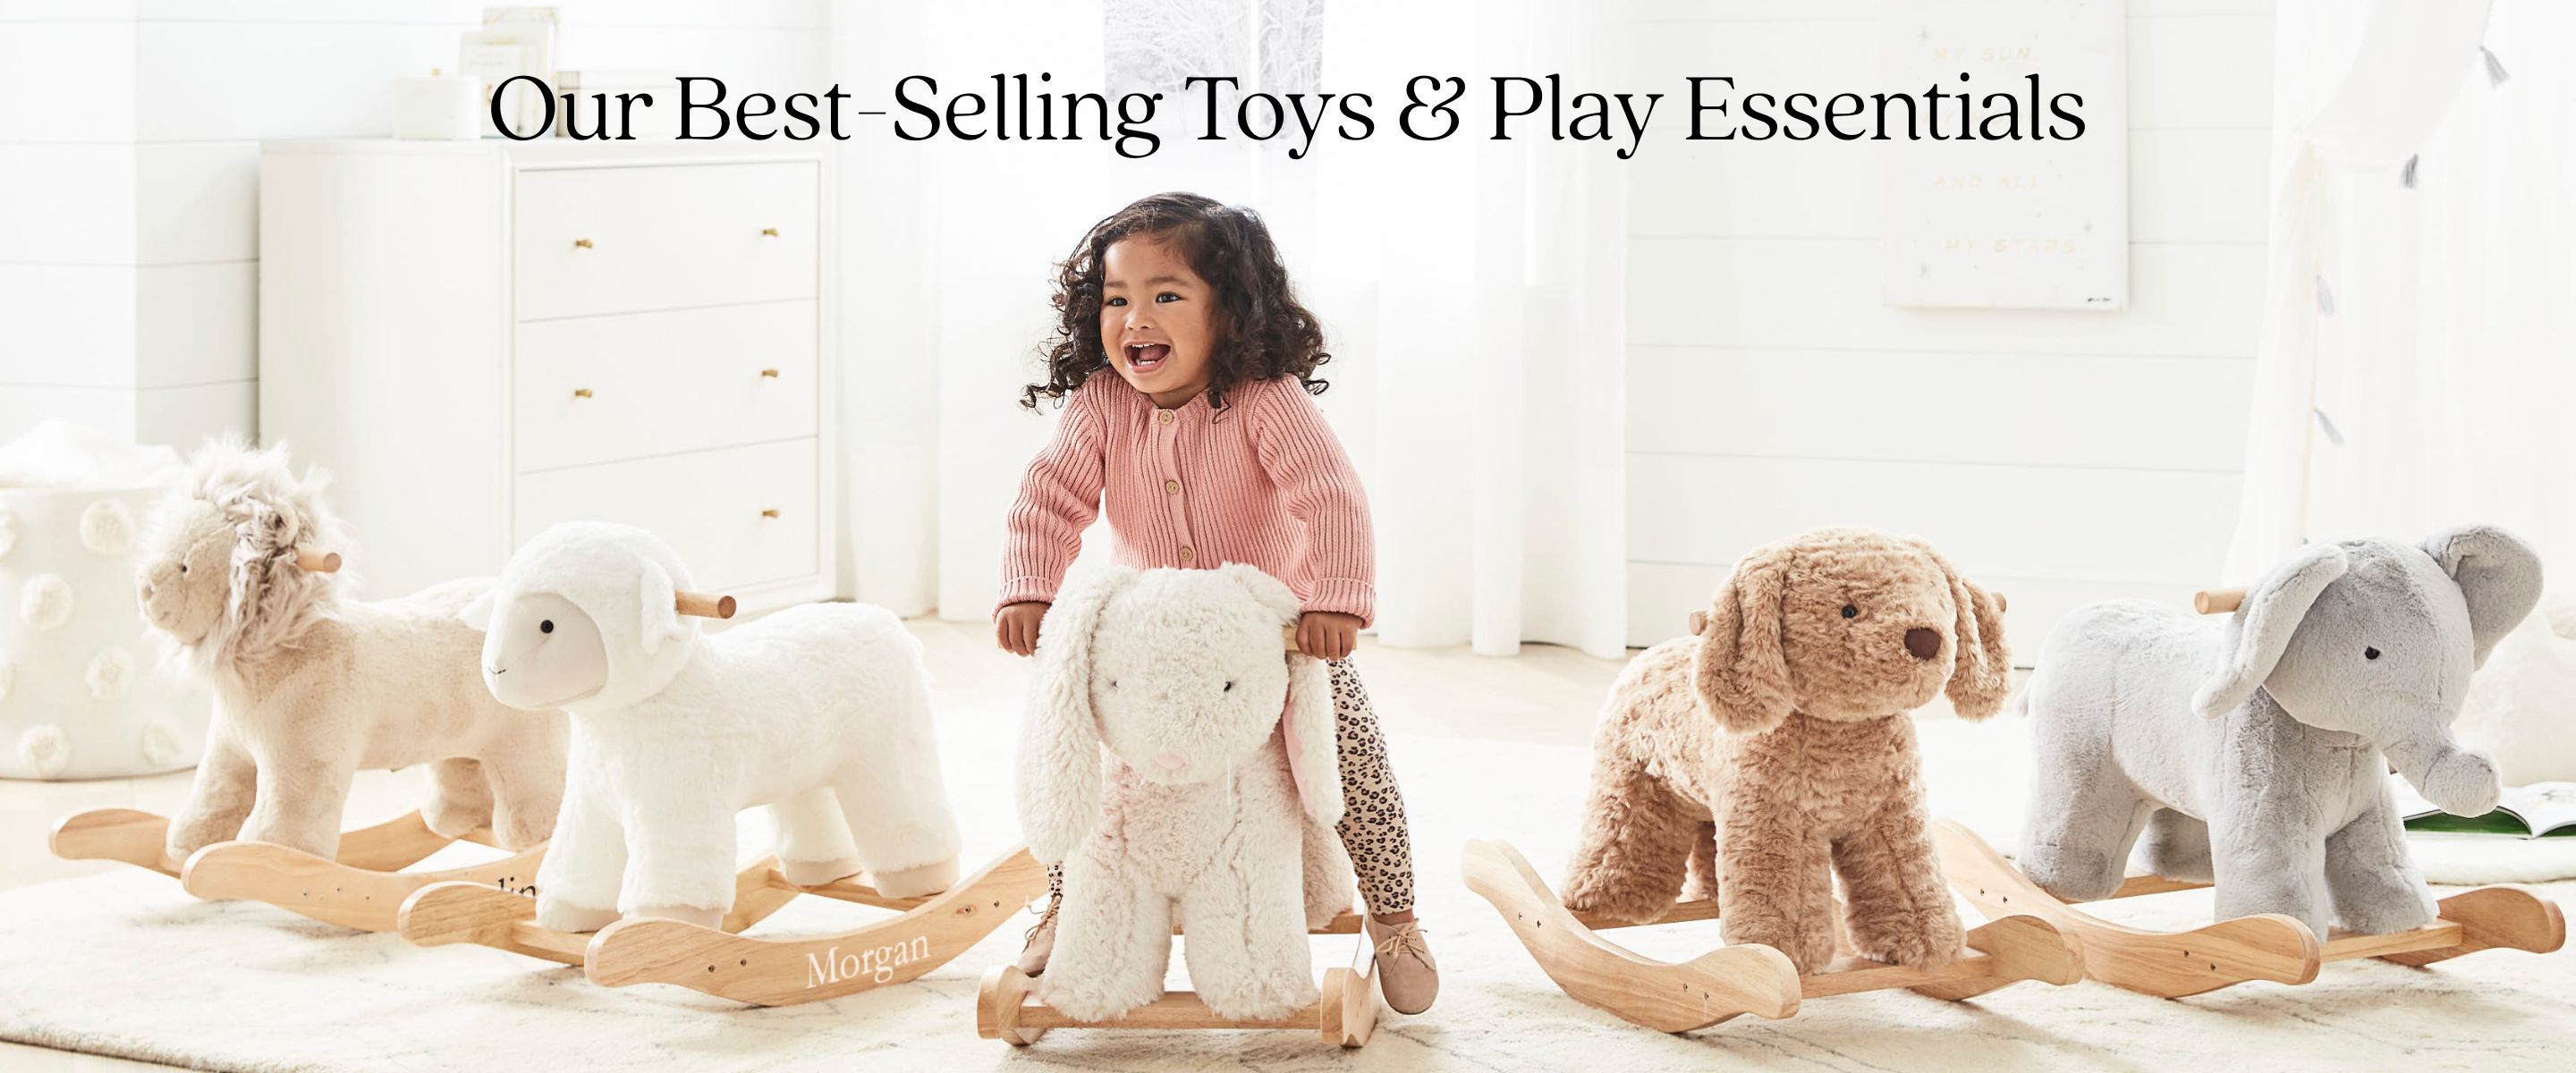 Our Best-Selling Toys & Play Essentials